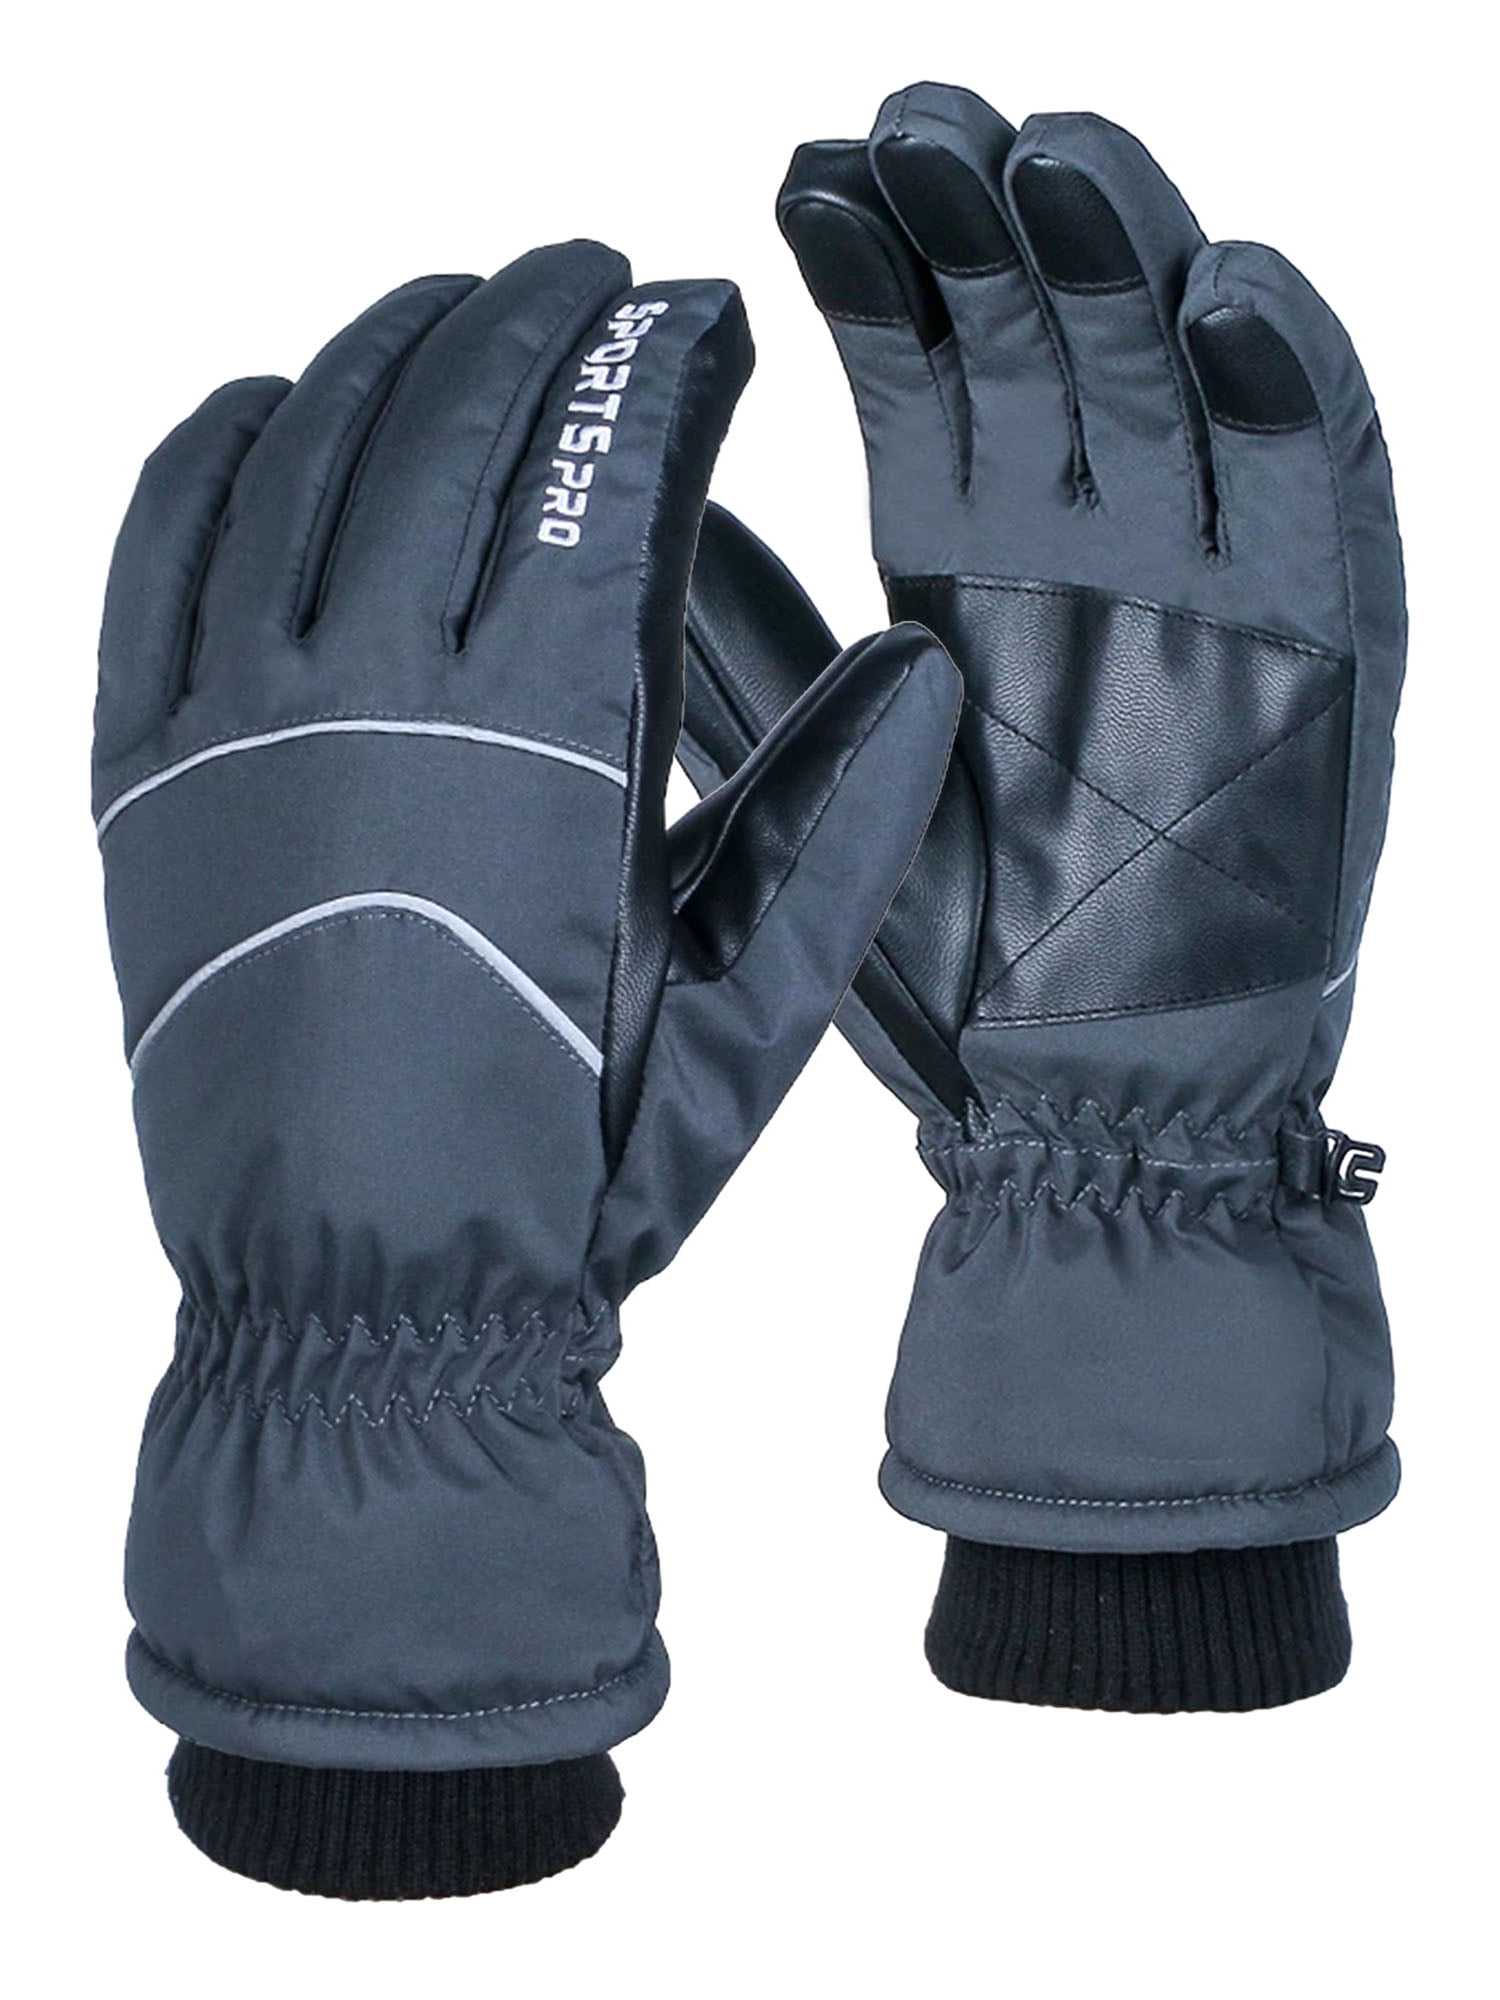 NIce Caps Kids Extreme Cold Weather 80 Gram Thinsulate Waterproof Ski Gloves Black 1, 3-4 Years 